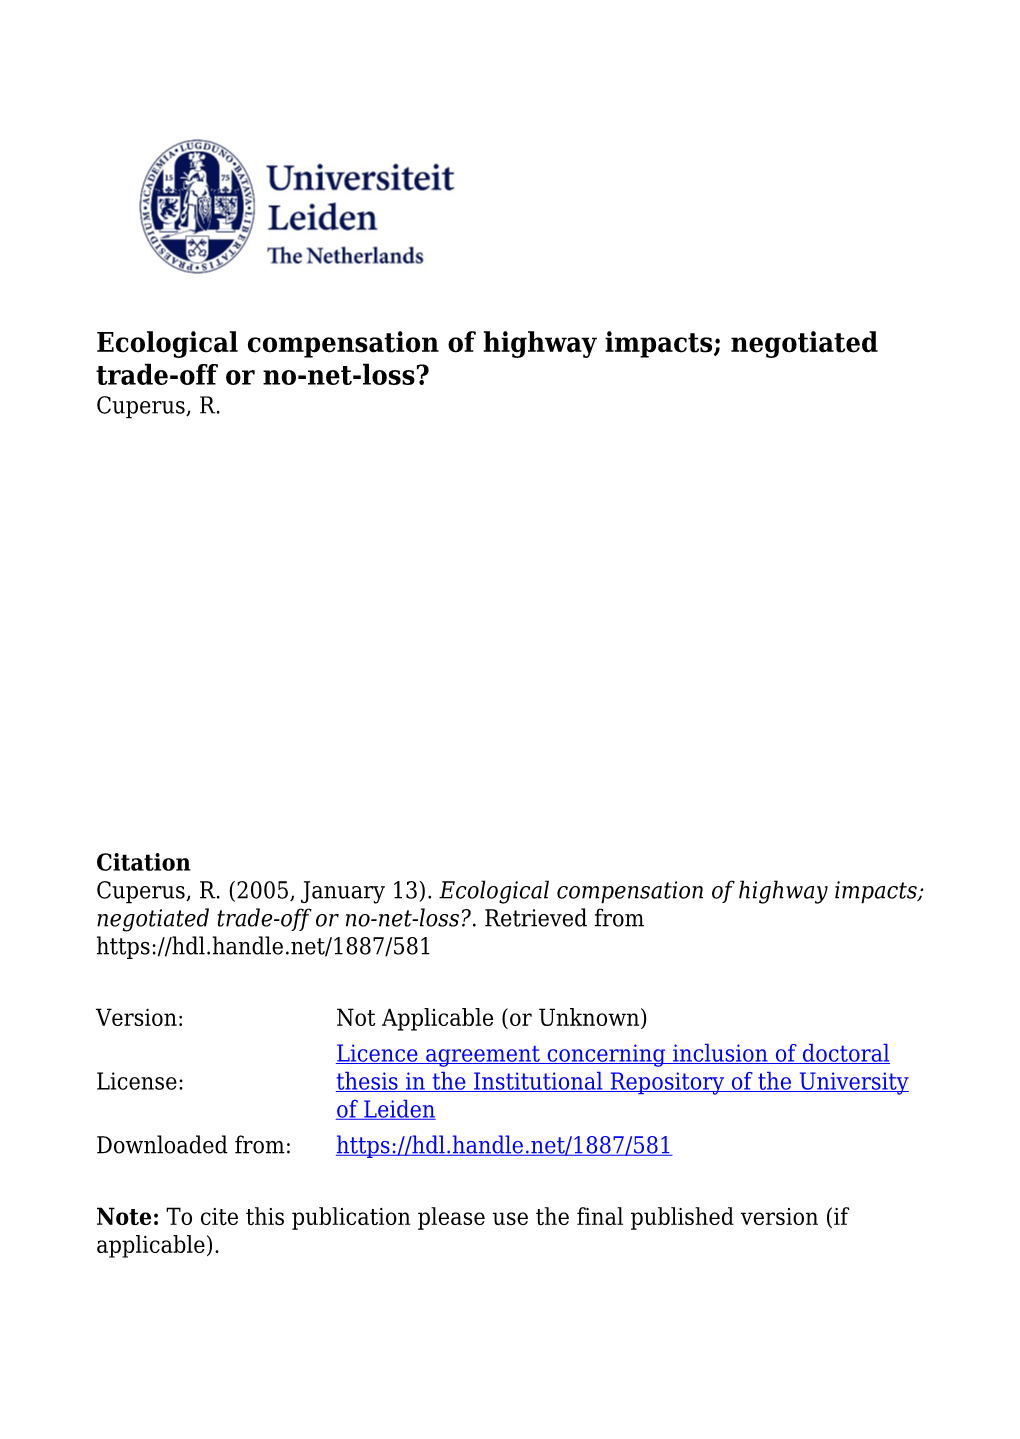 Ecological Compensation of Highway Impacts; Negotiated Trade-Off Or No-Net-Loss? Cuperus, R